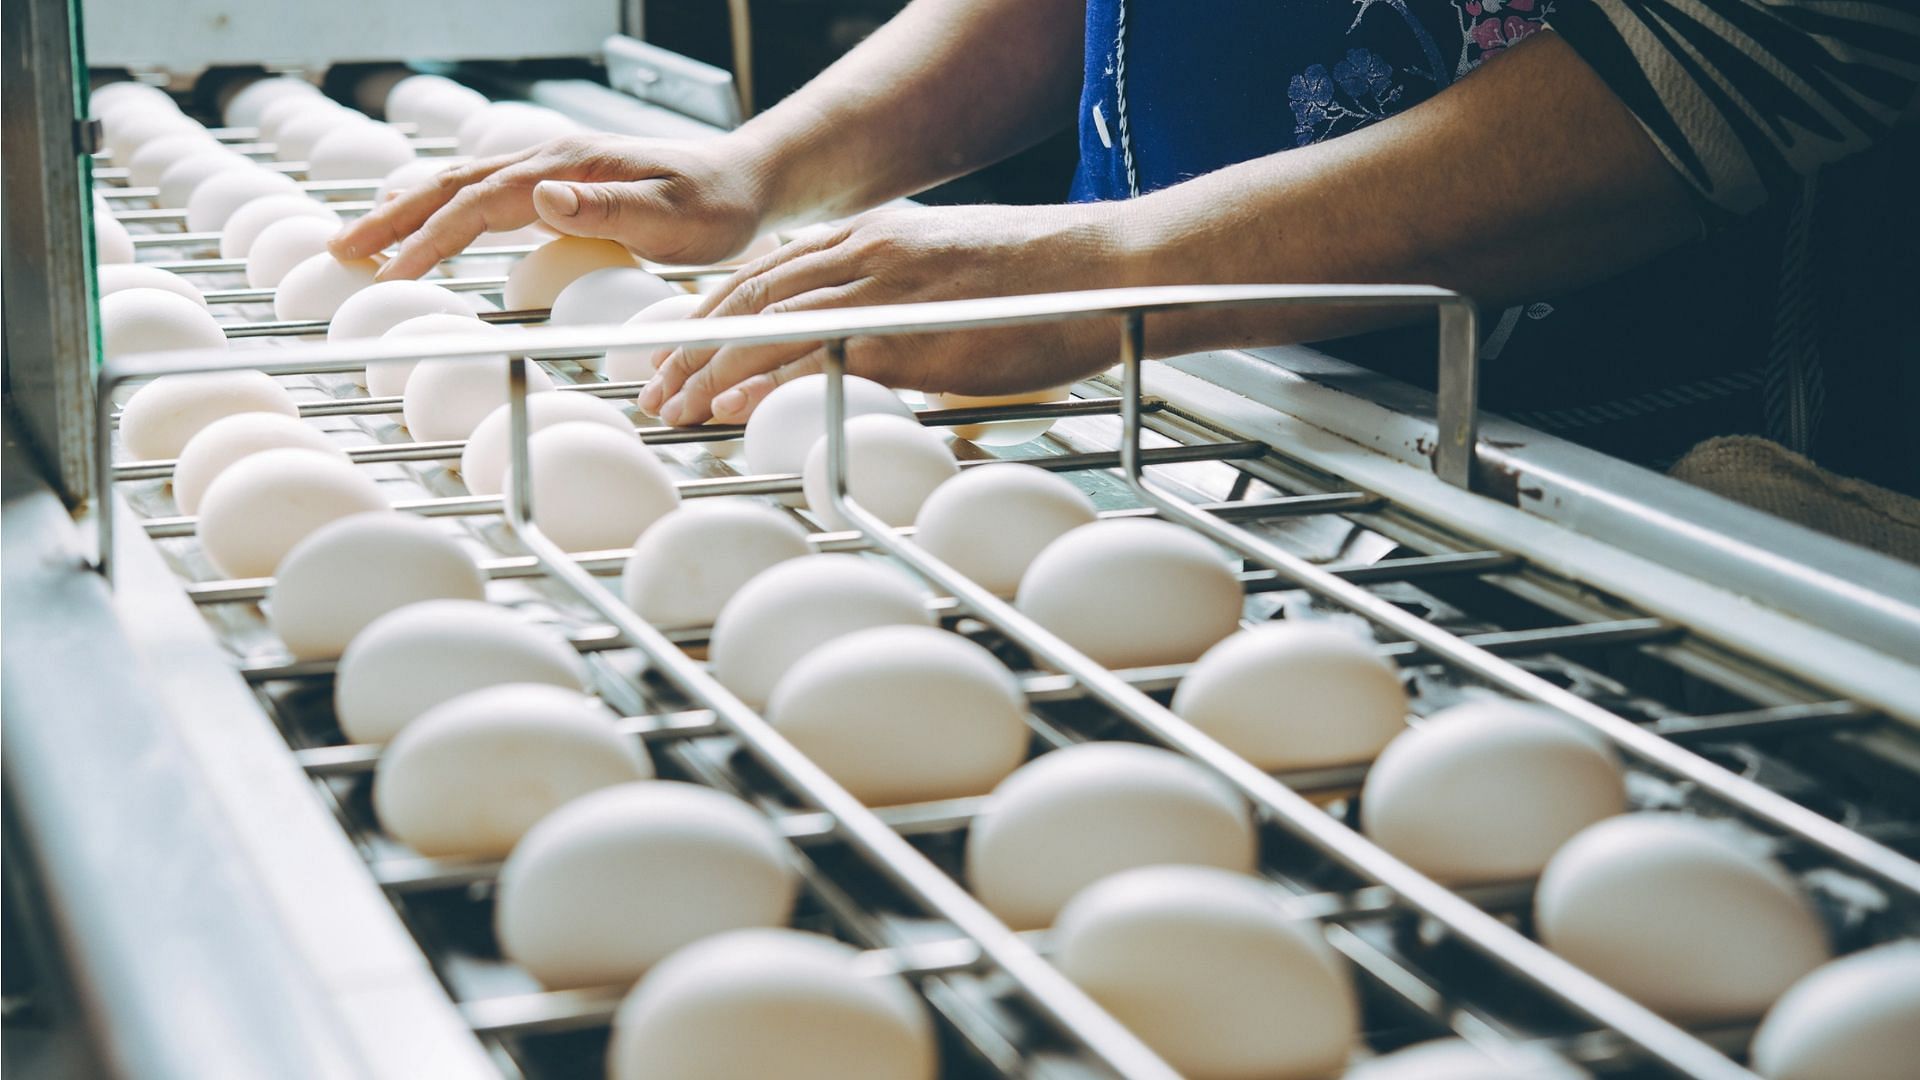 a worker shorts eggs at an egg factory plant amidst the rising egg prices (Image via Agnormark/Getty Images/iStockphoto)